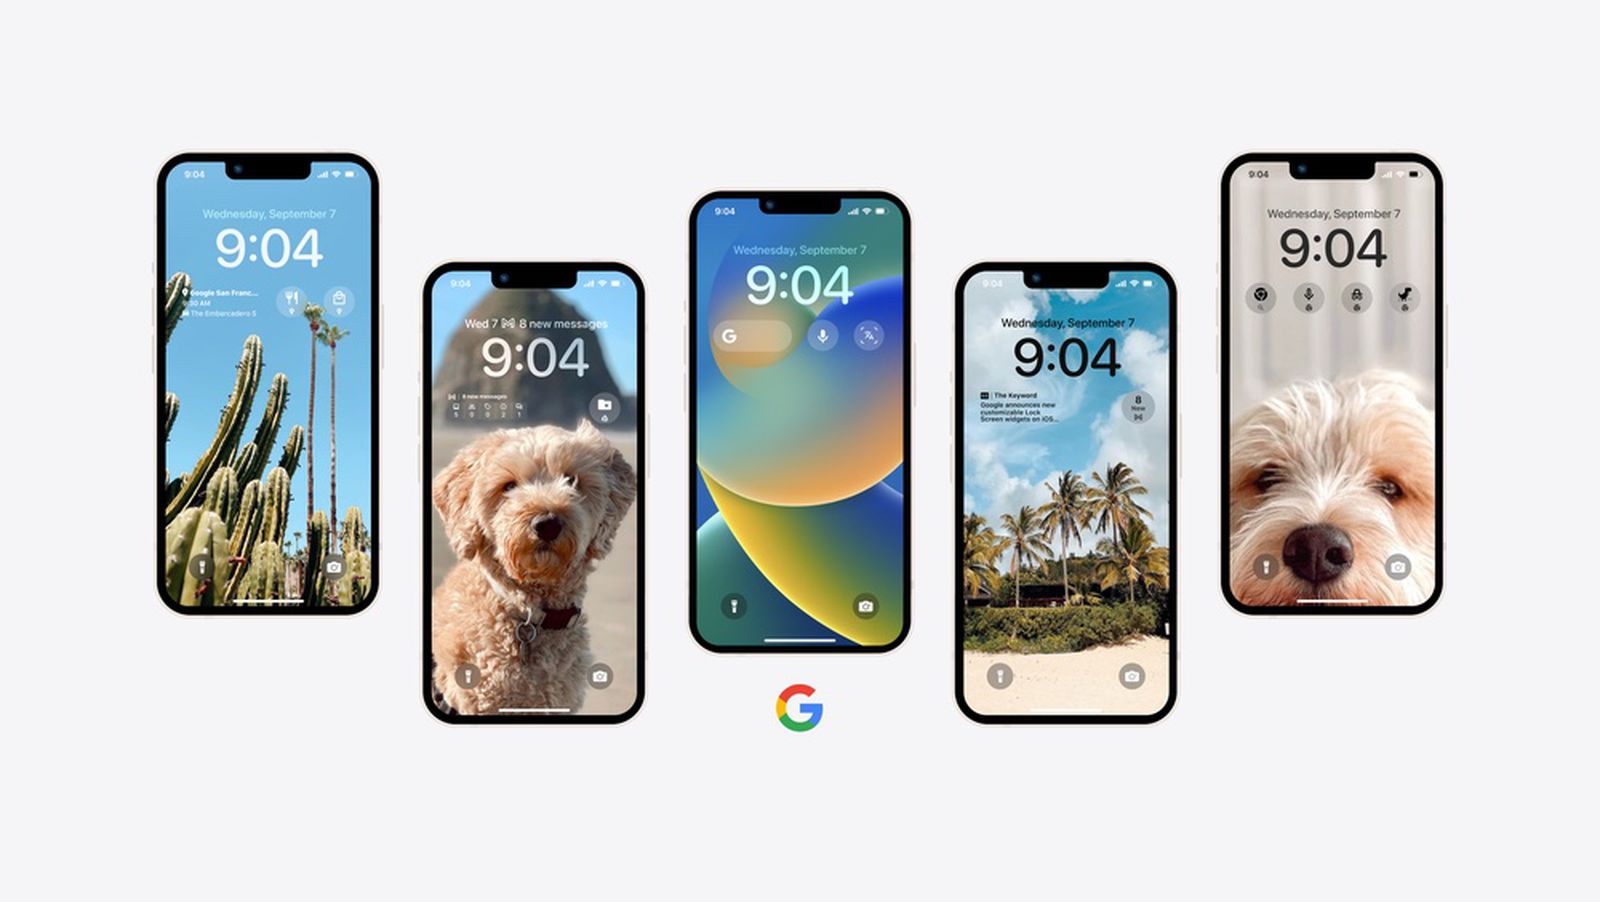 Google Previews New iOS 16 Lock Screen Widgets for Gmail, Chrome, and More